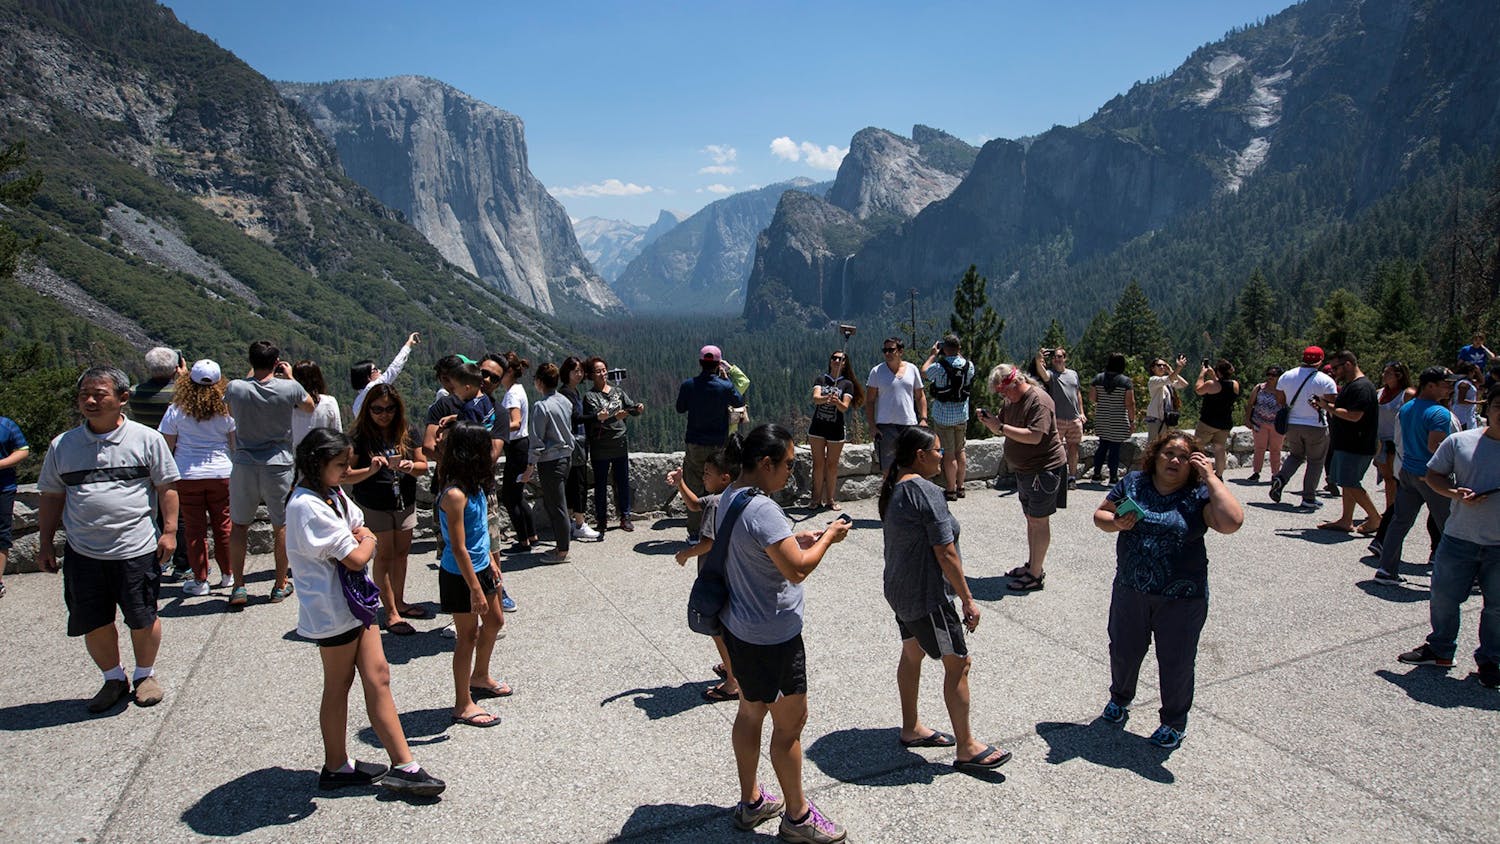 Visitors crowd Tunnel View overlooking Yosemite Valley in Yosemite National Park. The Trump administration is mulling proposals to privatize national park campgrounds and further commercialize the parks with expanded Wi-Fi service, food trucks and even Amazon deliveries at tourist camp sites. 